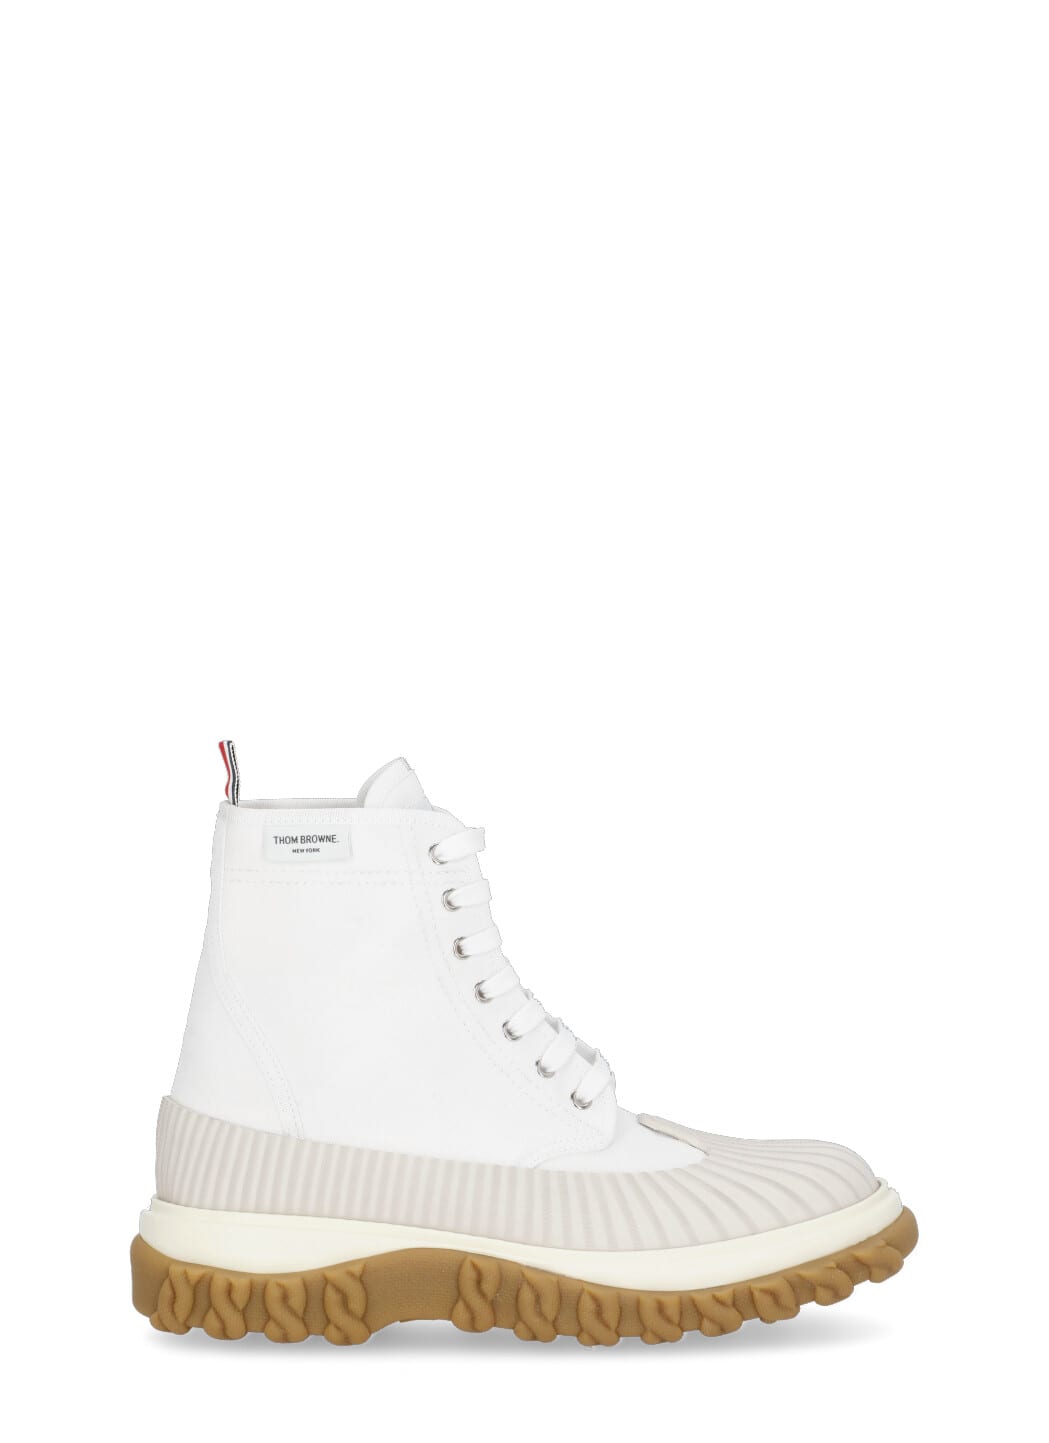 Thom Browne Canvas Boots